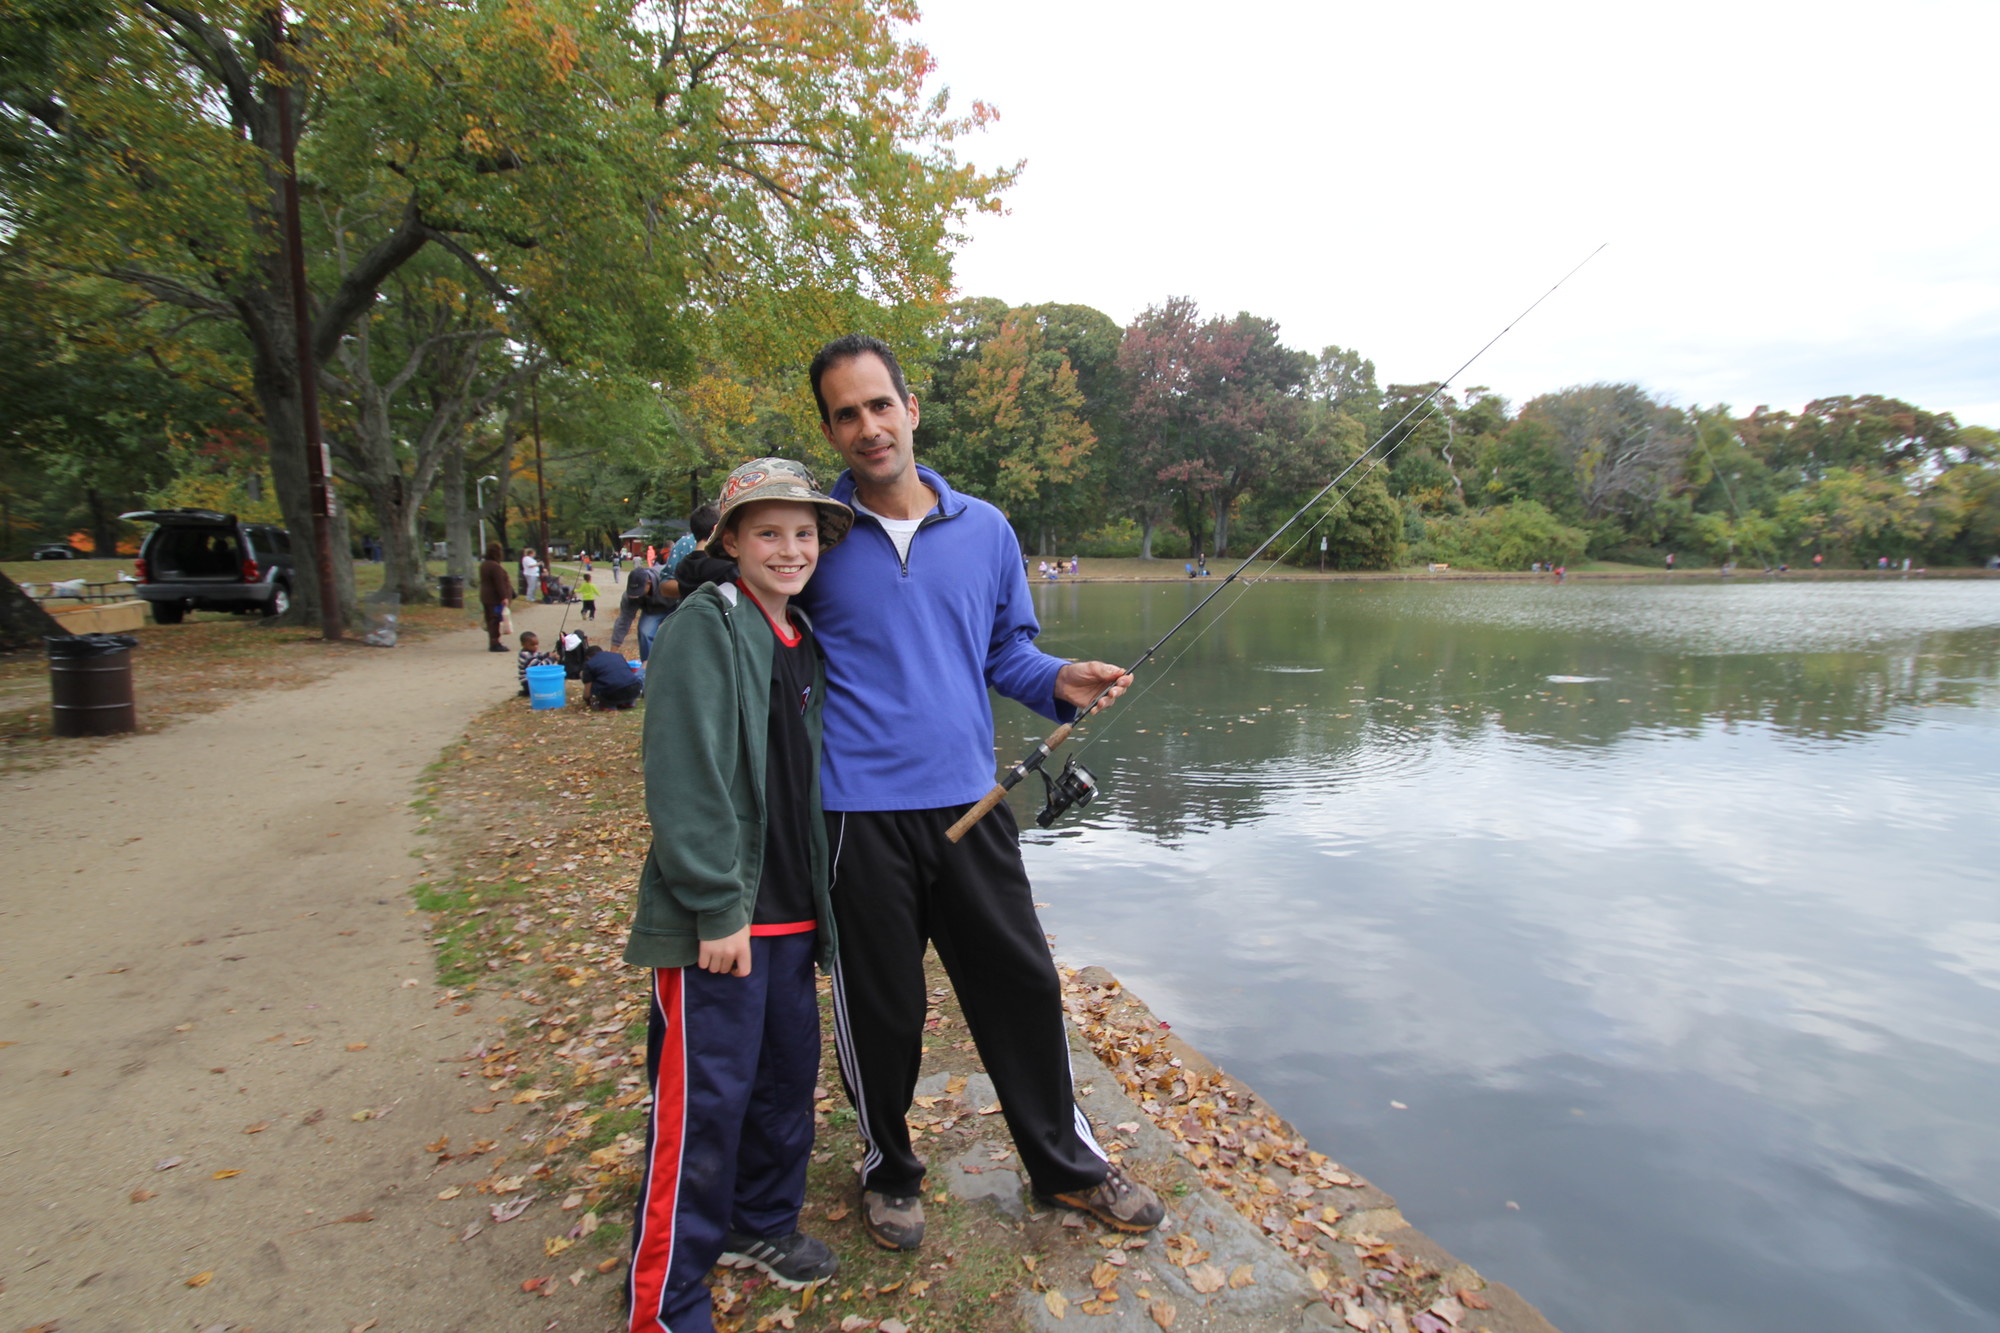 Elan Ben Yosef and his son Eli, left, spent quality time together fishing at the festival.